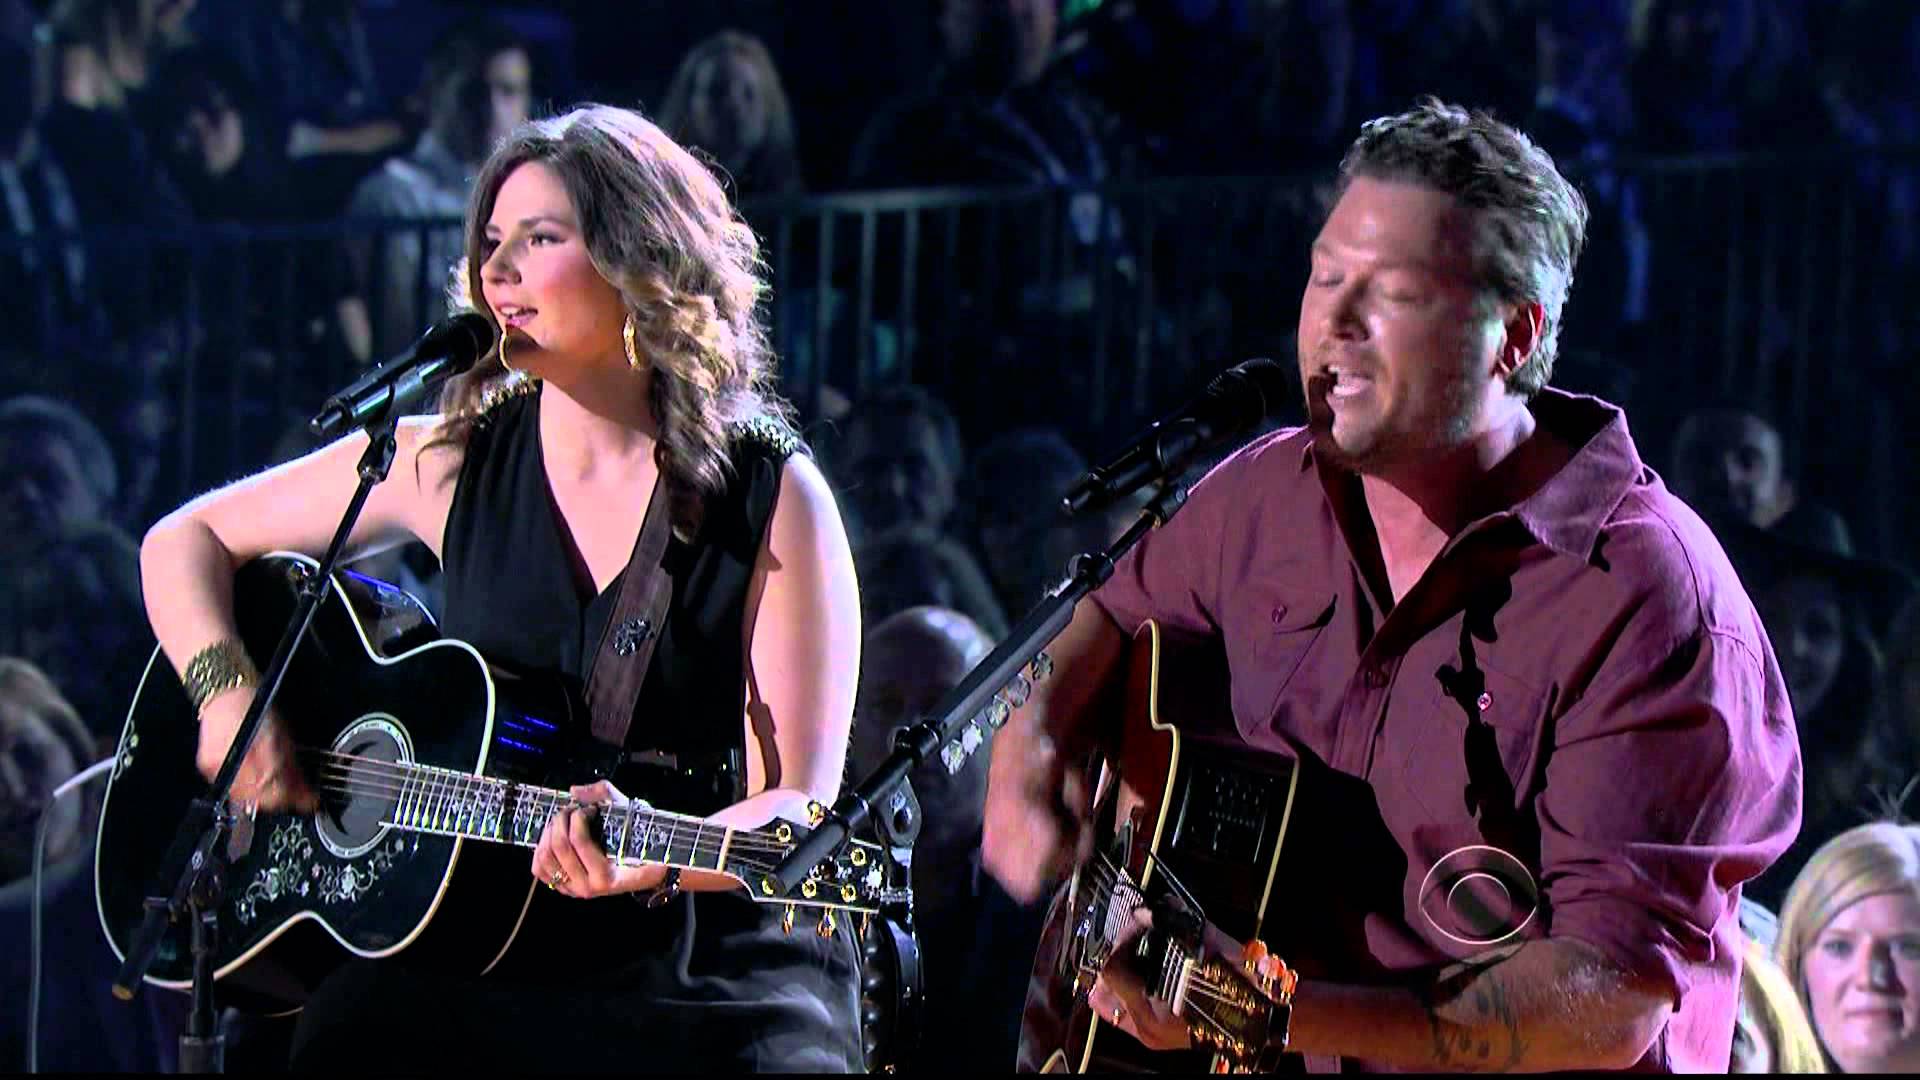 So many GREAT performances last night at the 2013 CMA's..here's one of our favorites ...1920 x 1080